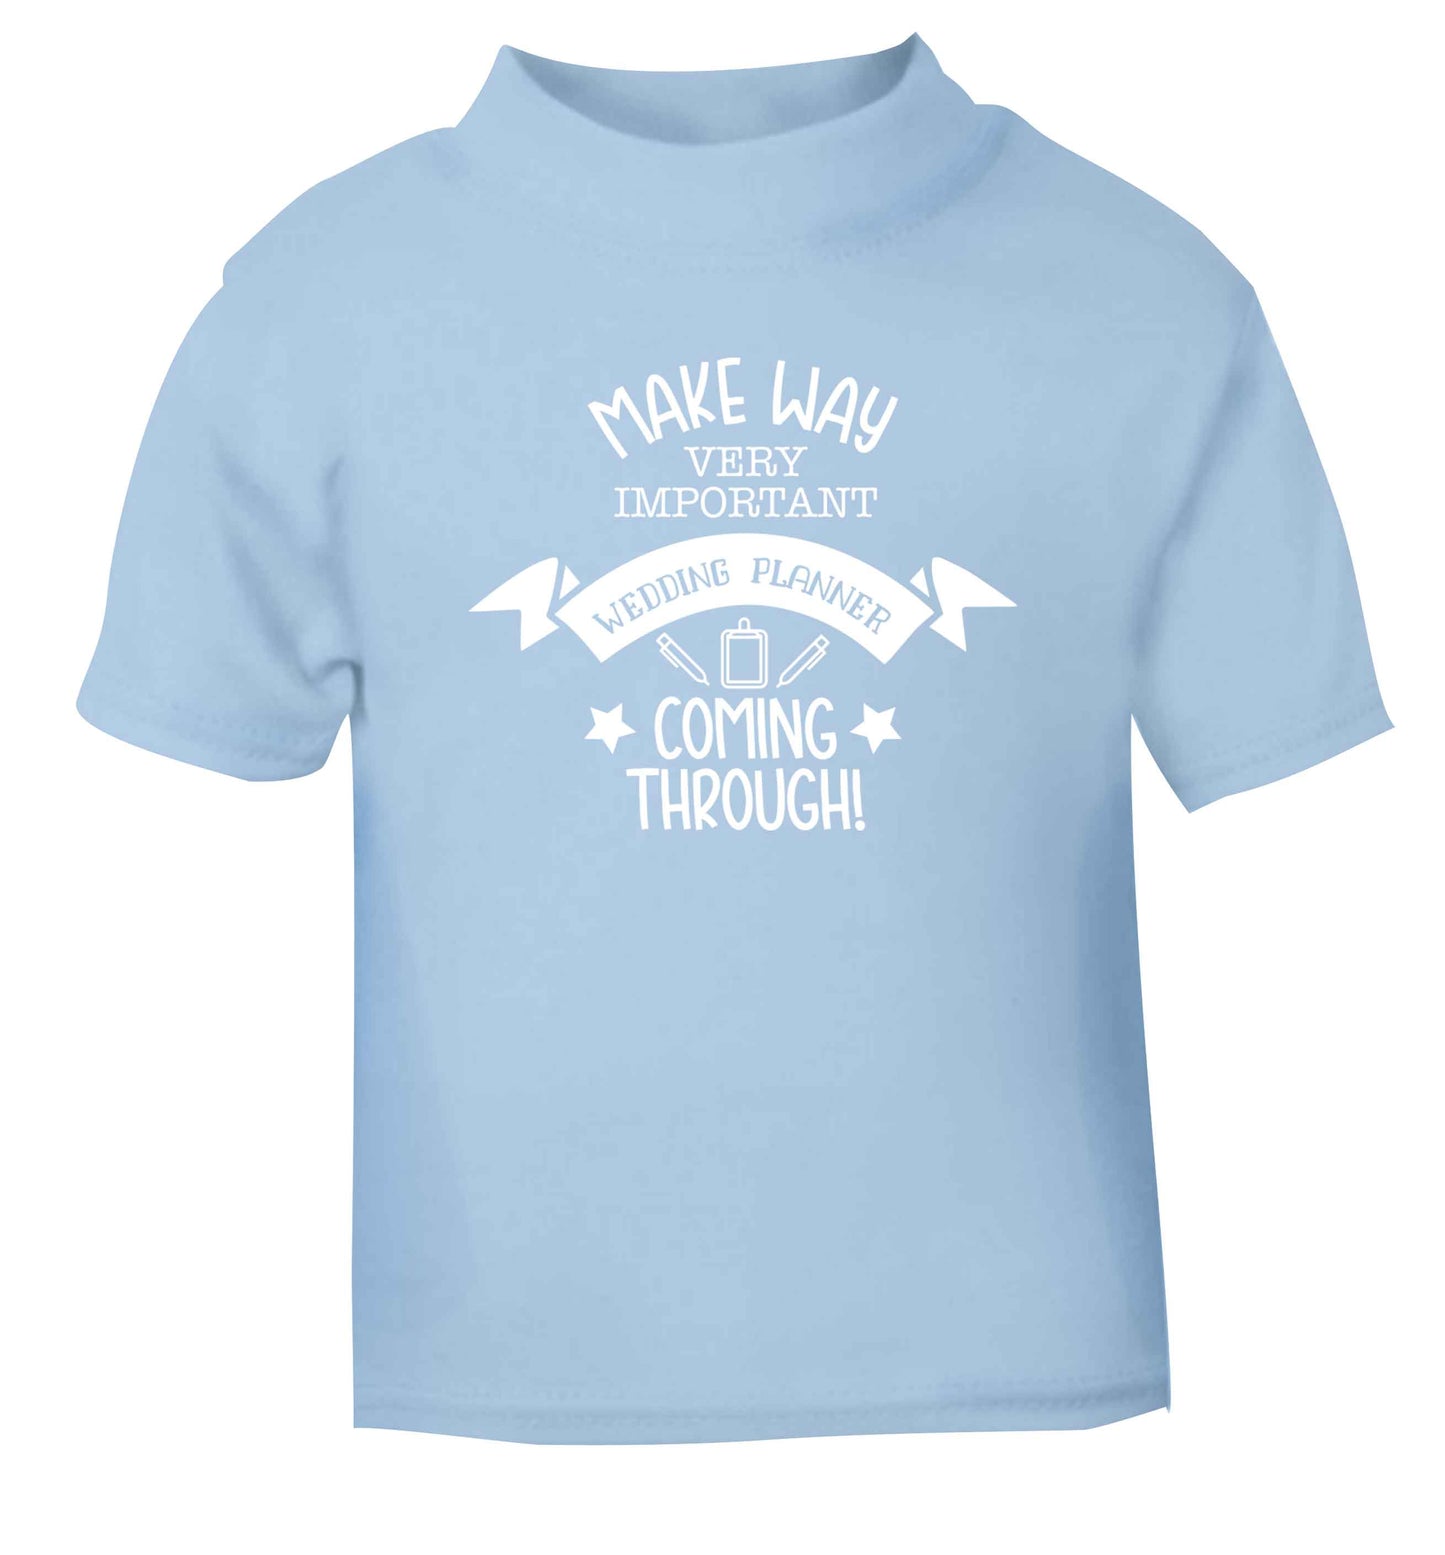 Make way very important wedding planner coming through light blue Baby Toddler Tshirt 2 Years